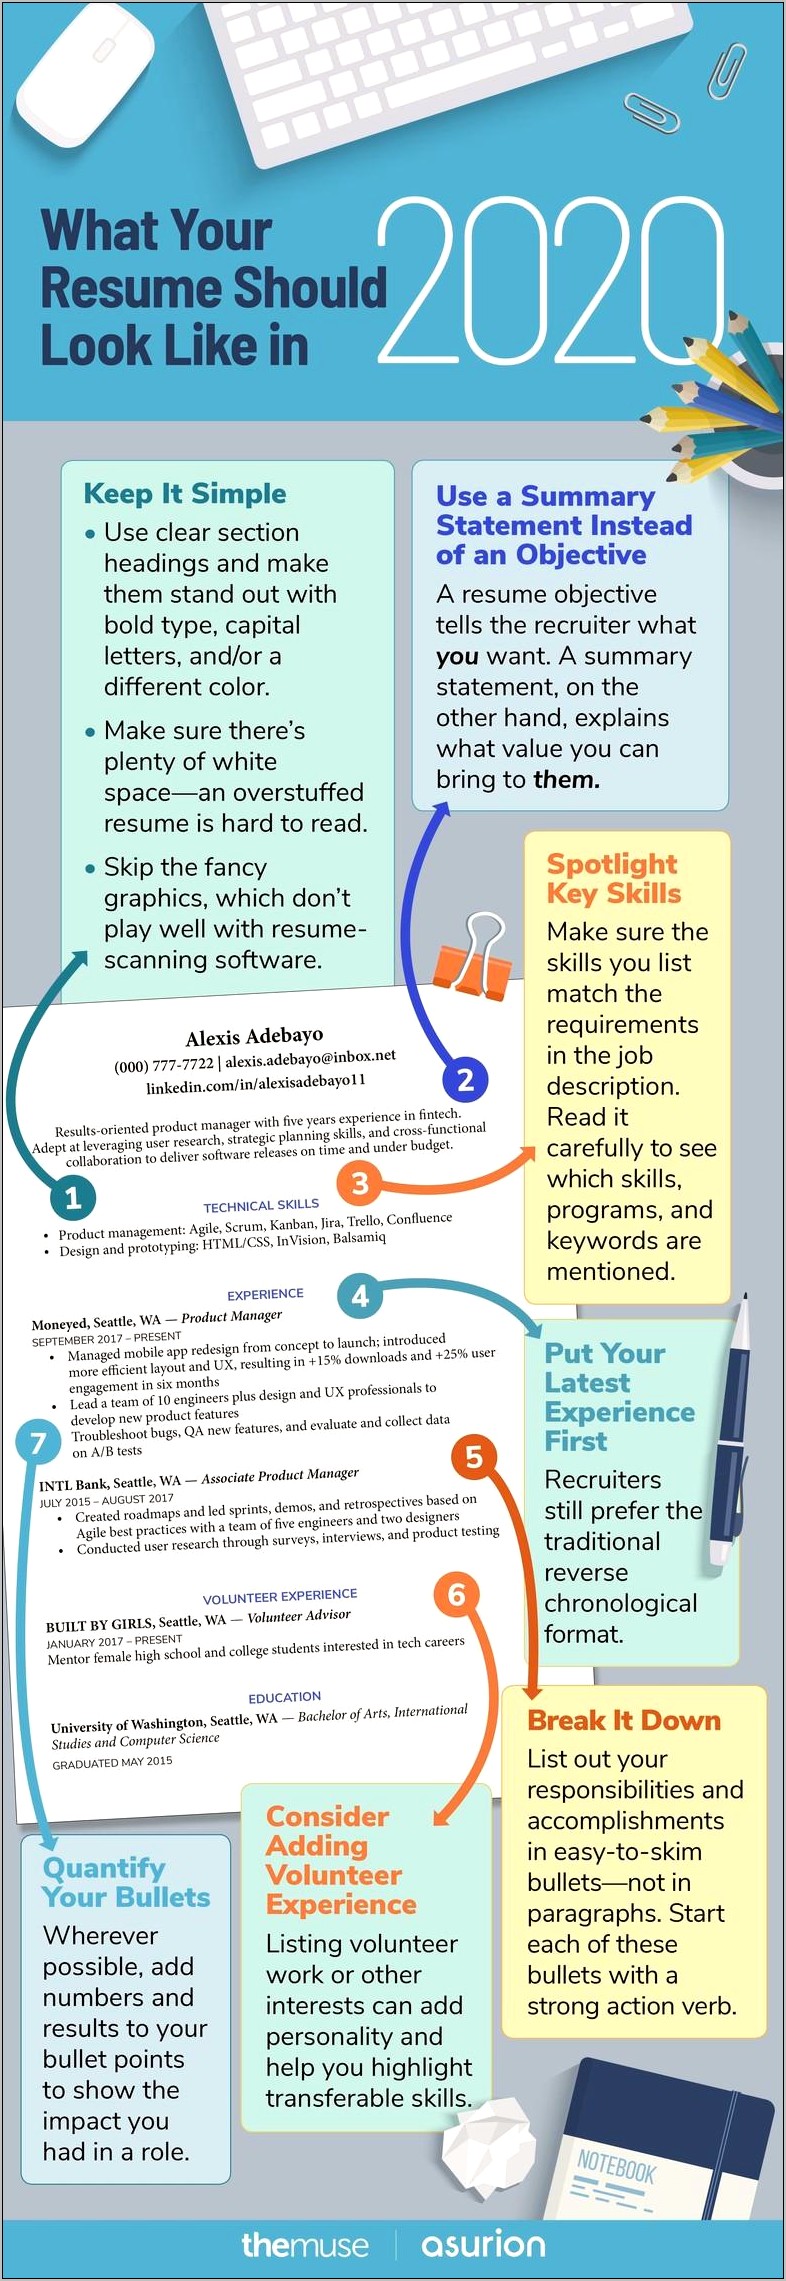 Customize Your Resume For The Best Results